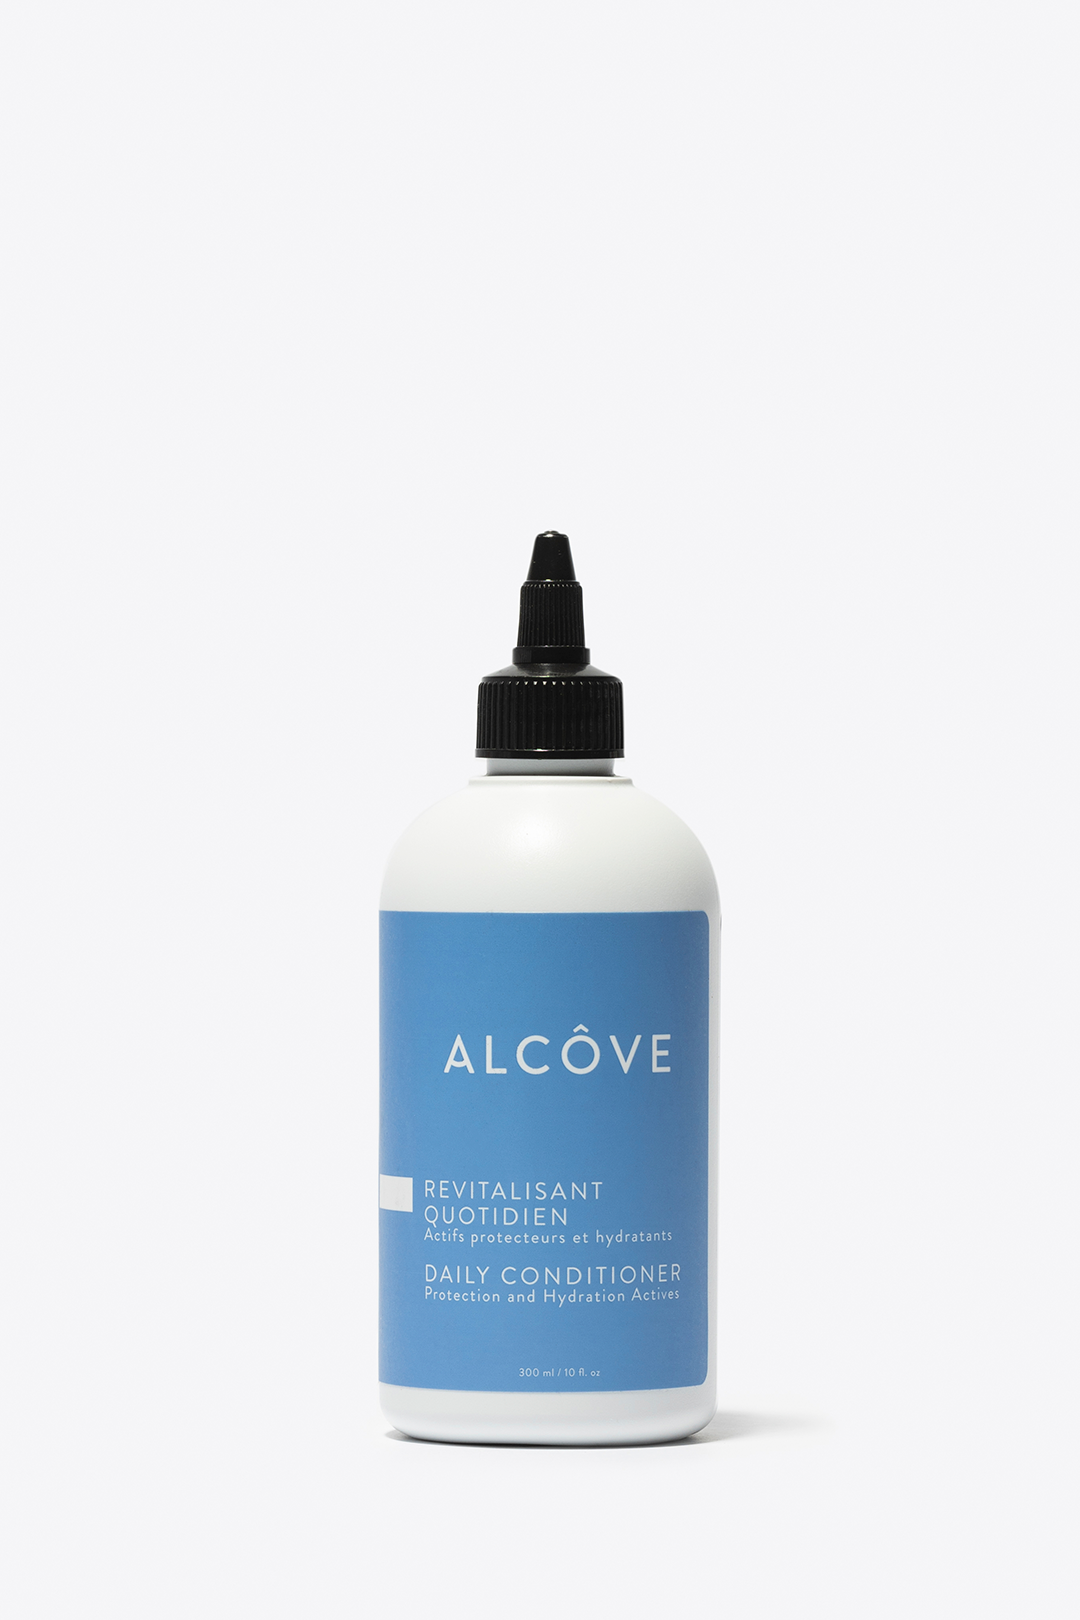 Alcove - DAILY CONDITIONER - by Alcove |ProCare Outlet|